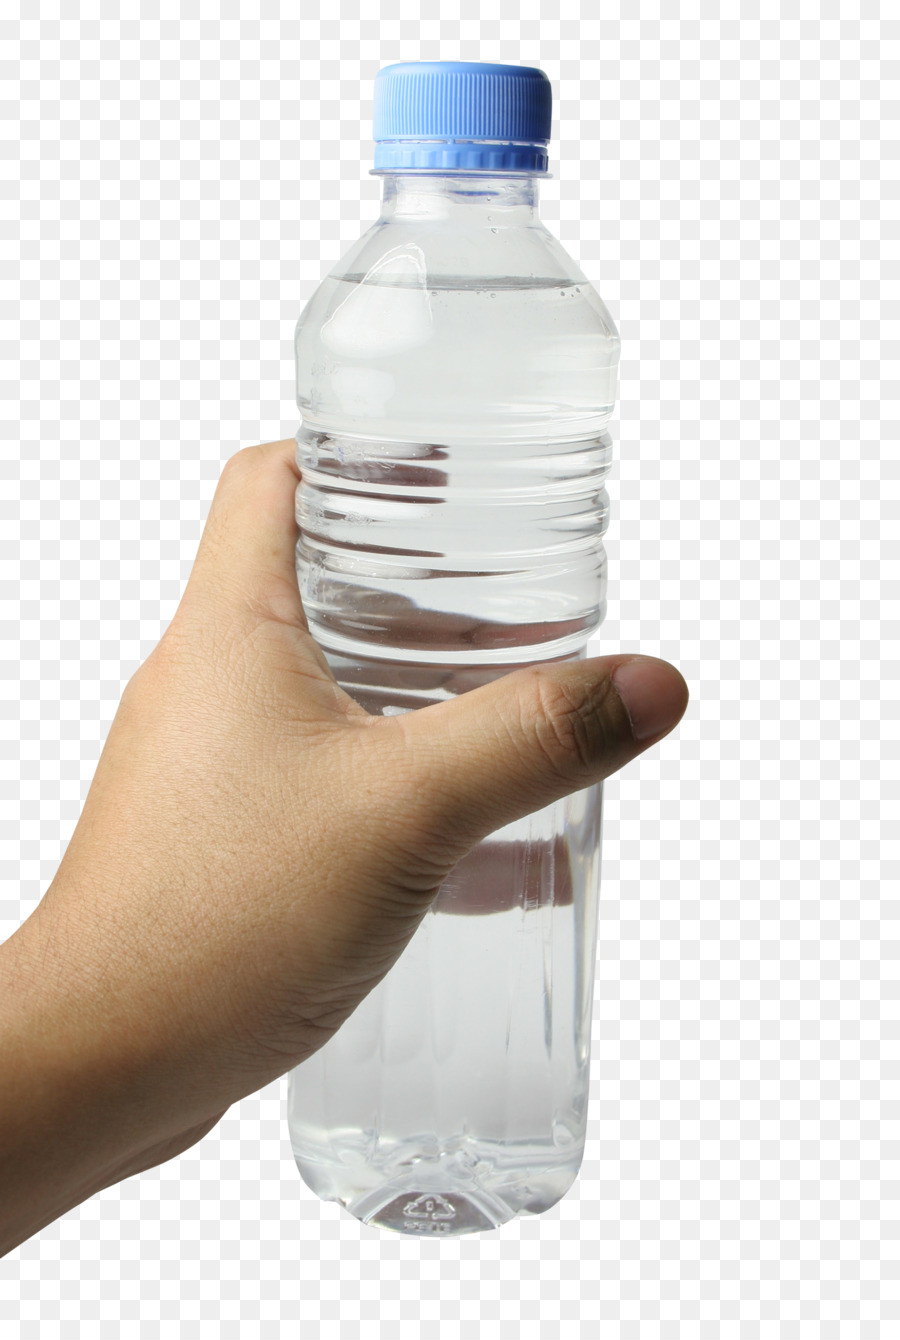 Water bottle First Baptist Church of Los Angeles Clip art - Hand With Water Bottle png download - 1400*2060 - Free Transparent Water Bottle png Download.